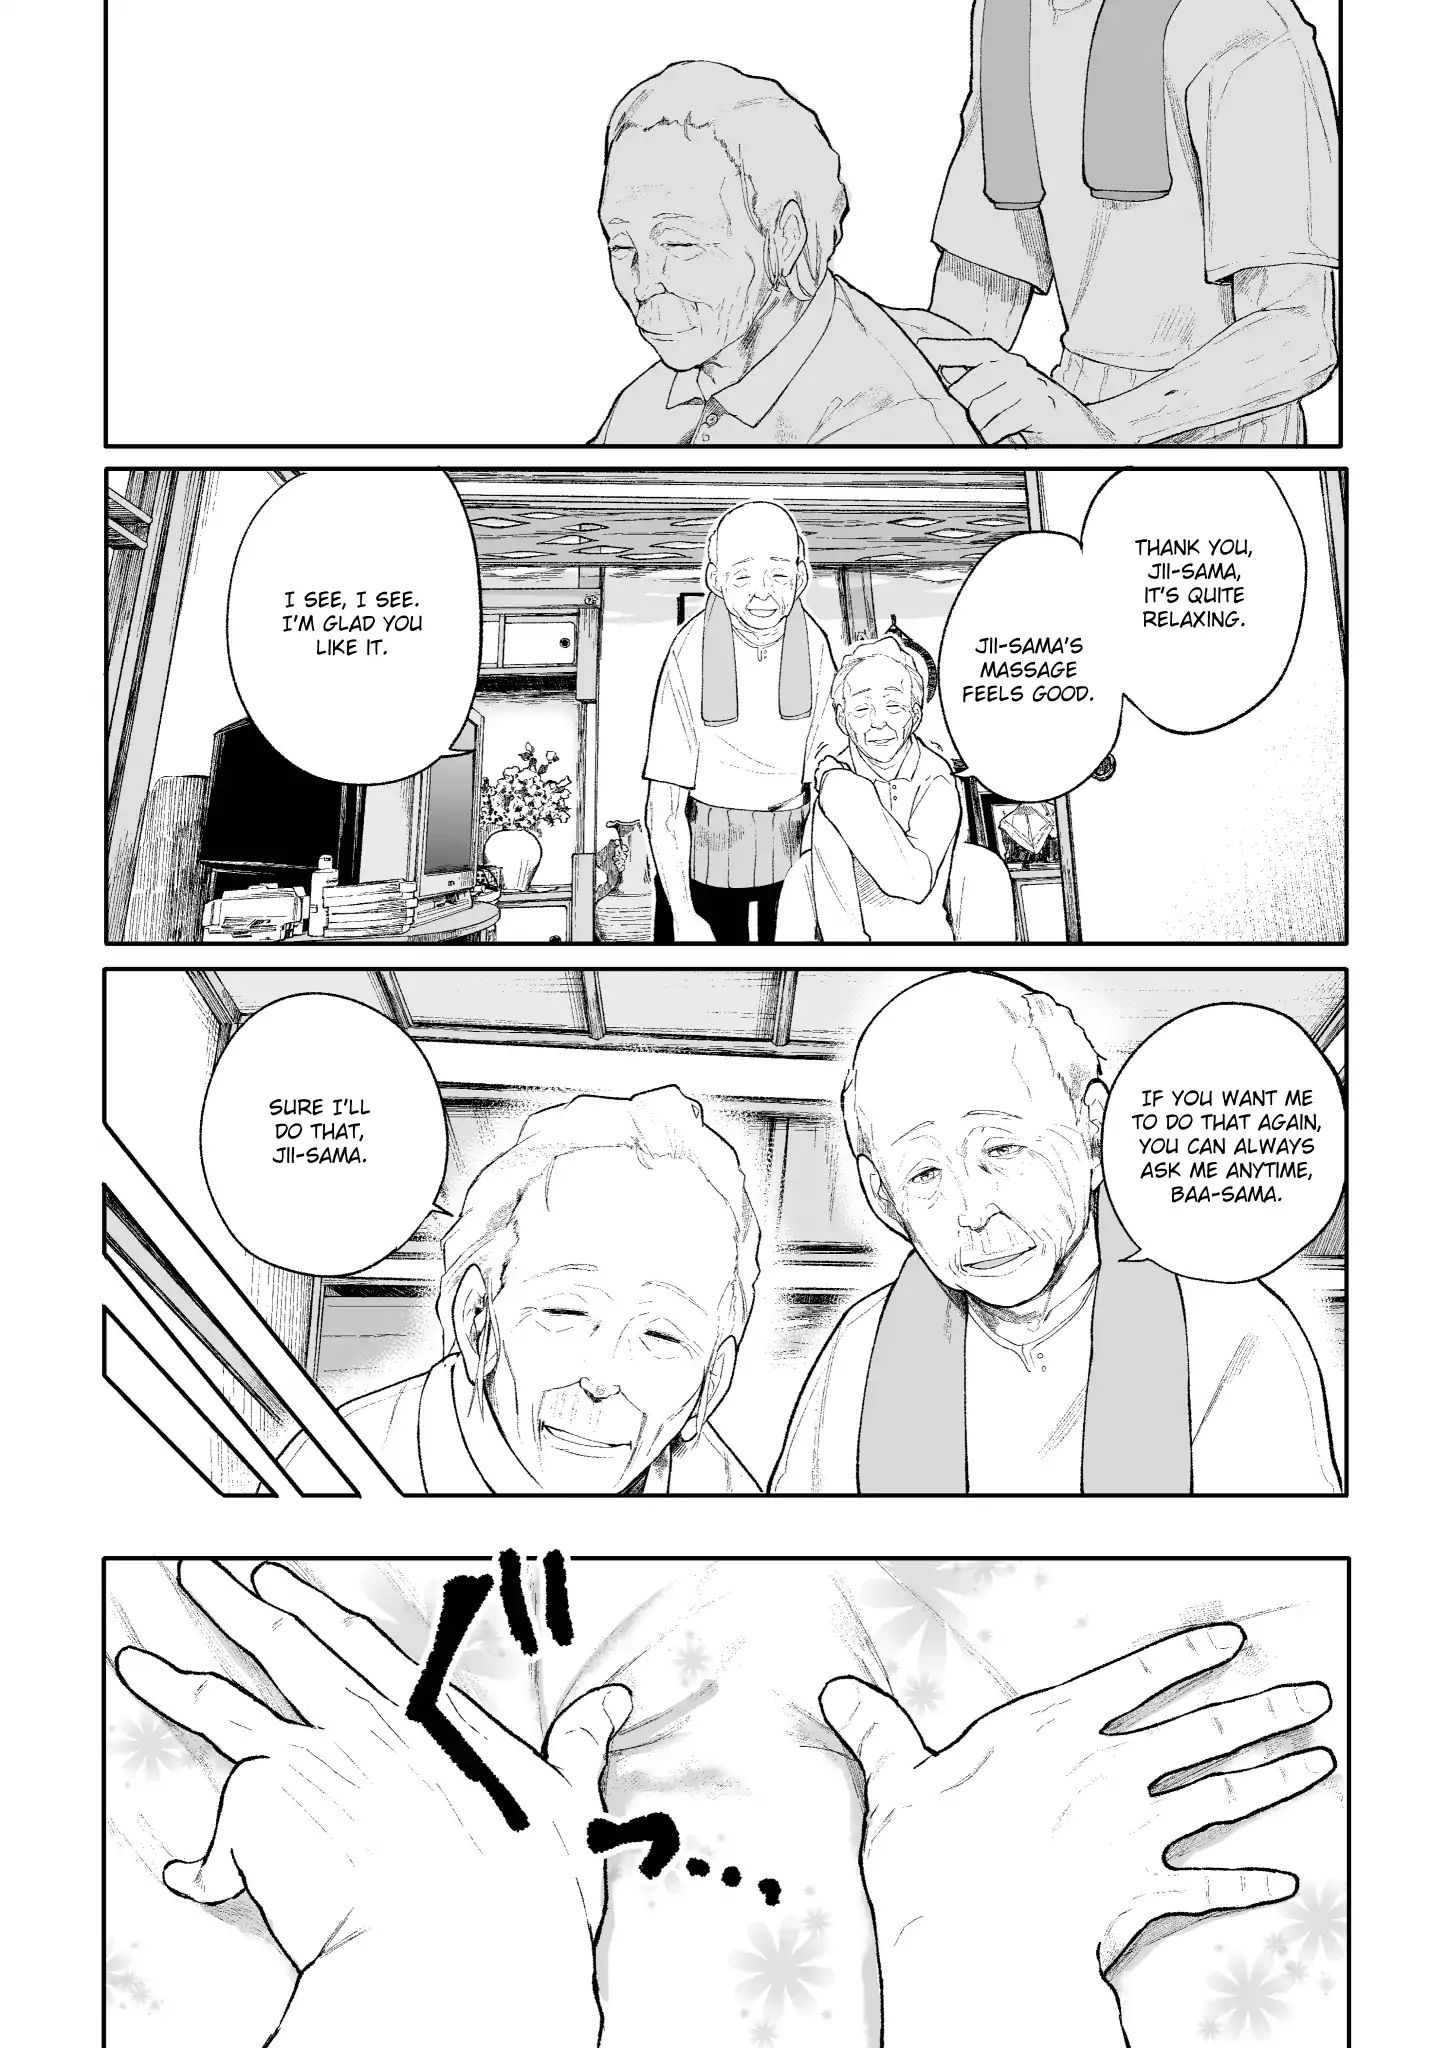 A Story About A Grampa And Granma Returned Back To Their Youth. - Page 1